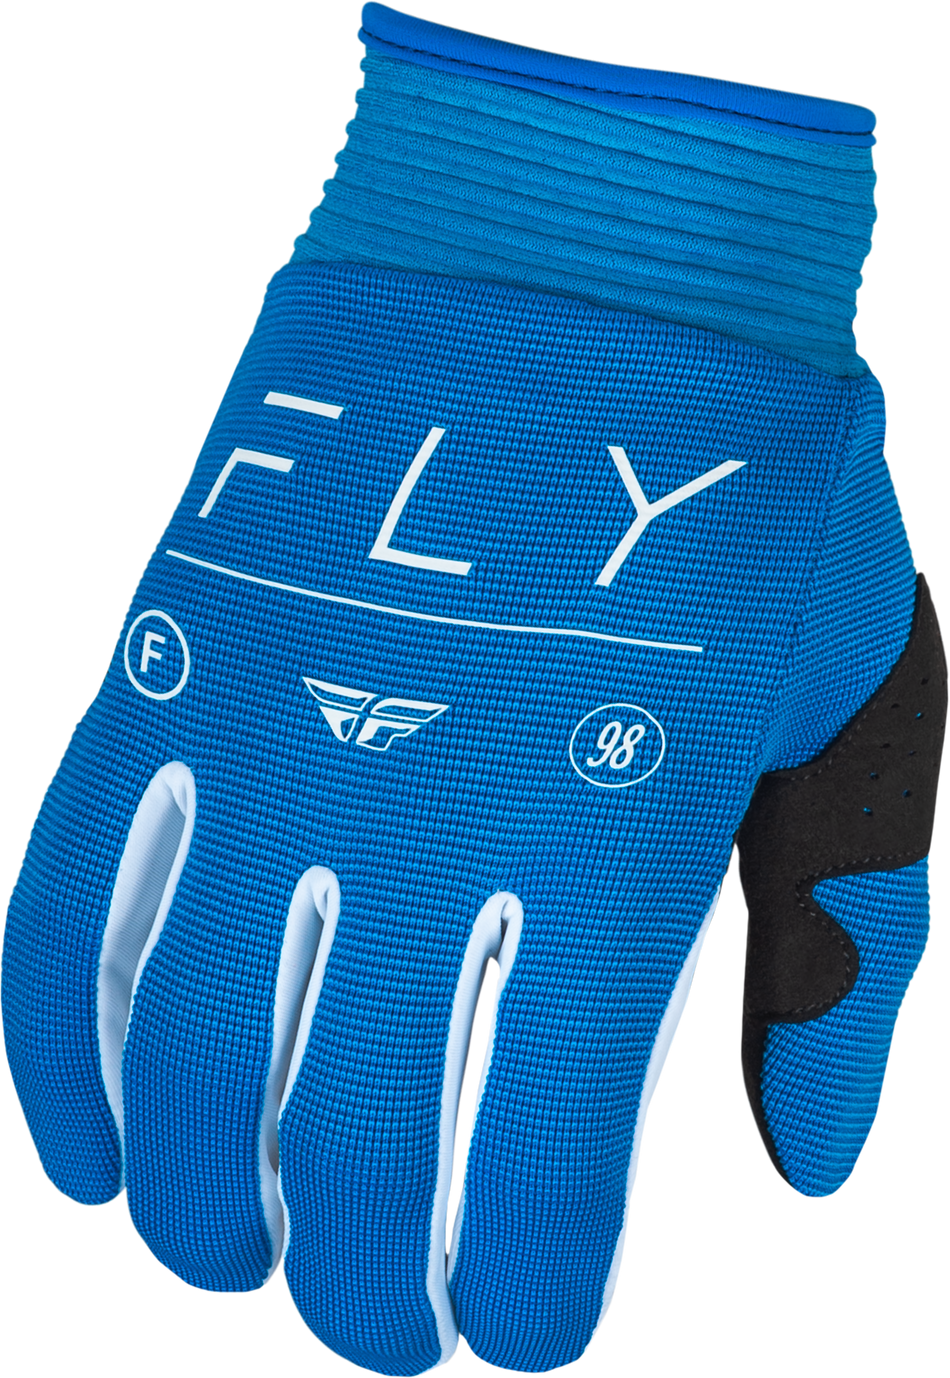 FLY RACING F-16 Gloves True Blue/White Md 377-914M